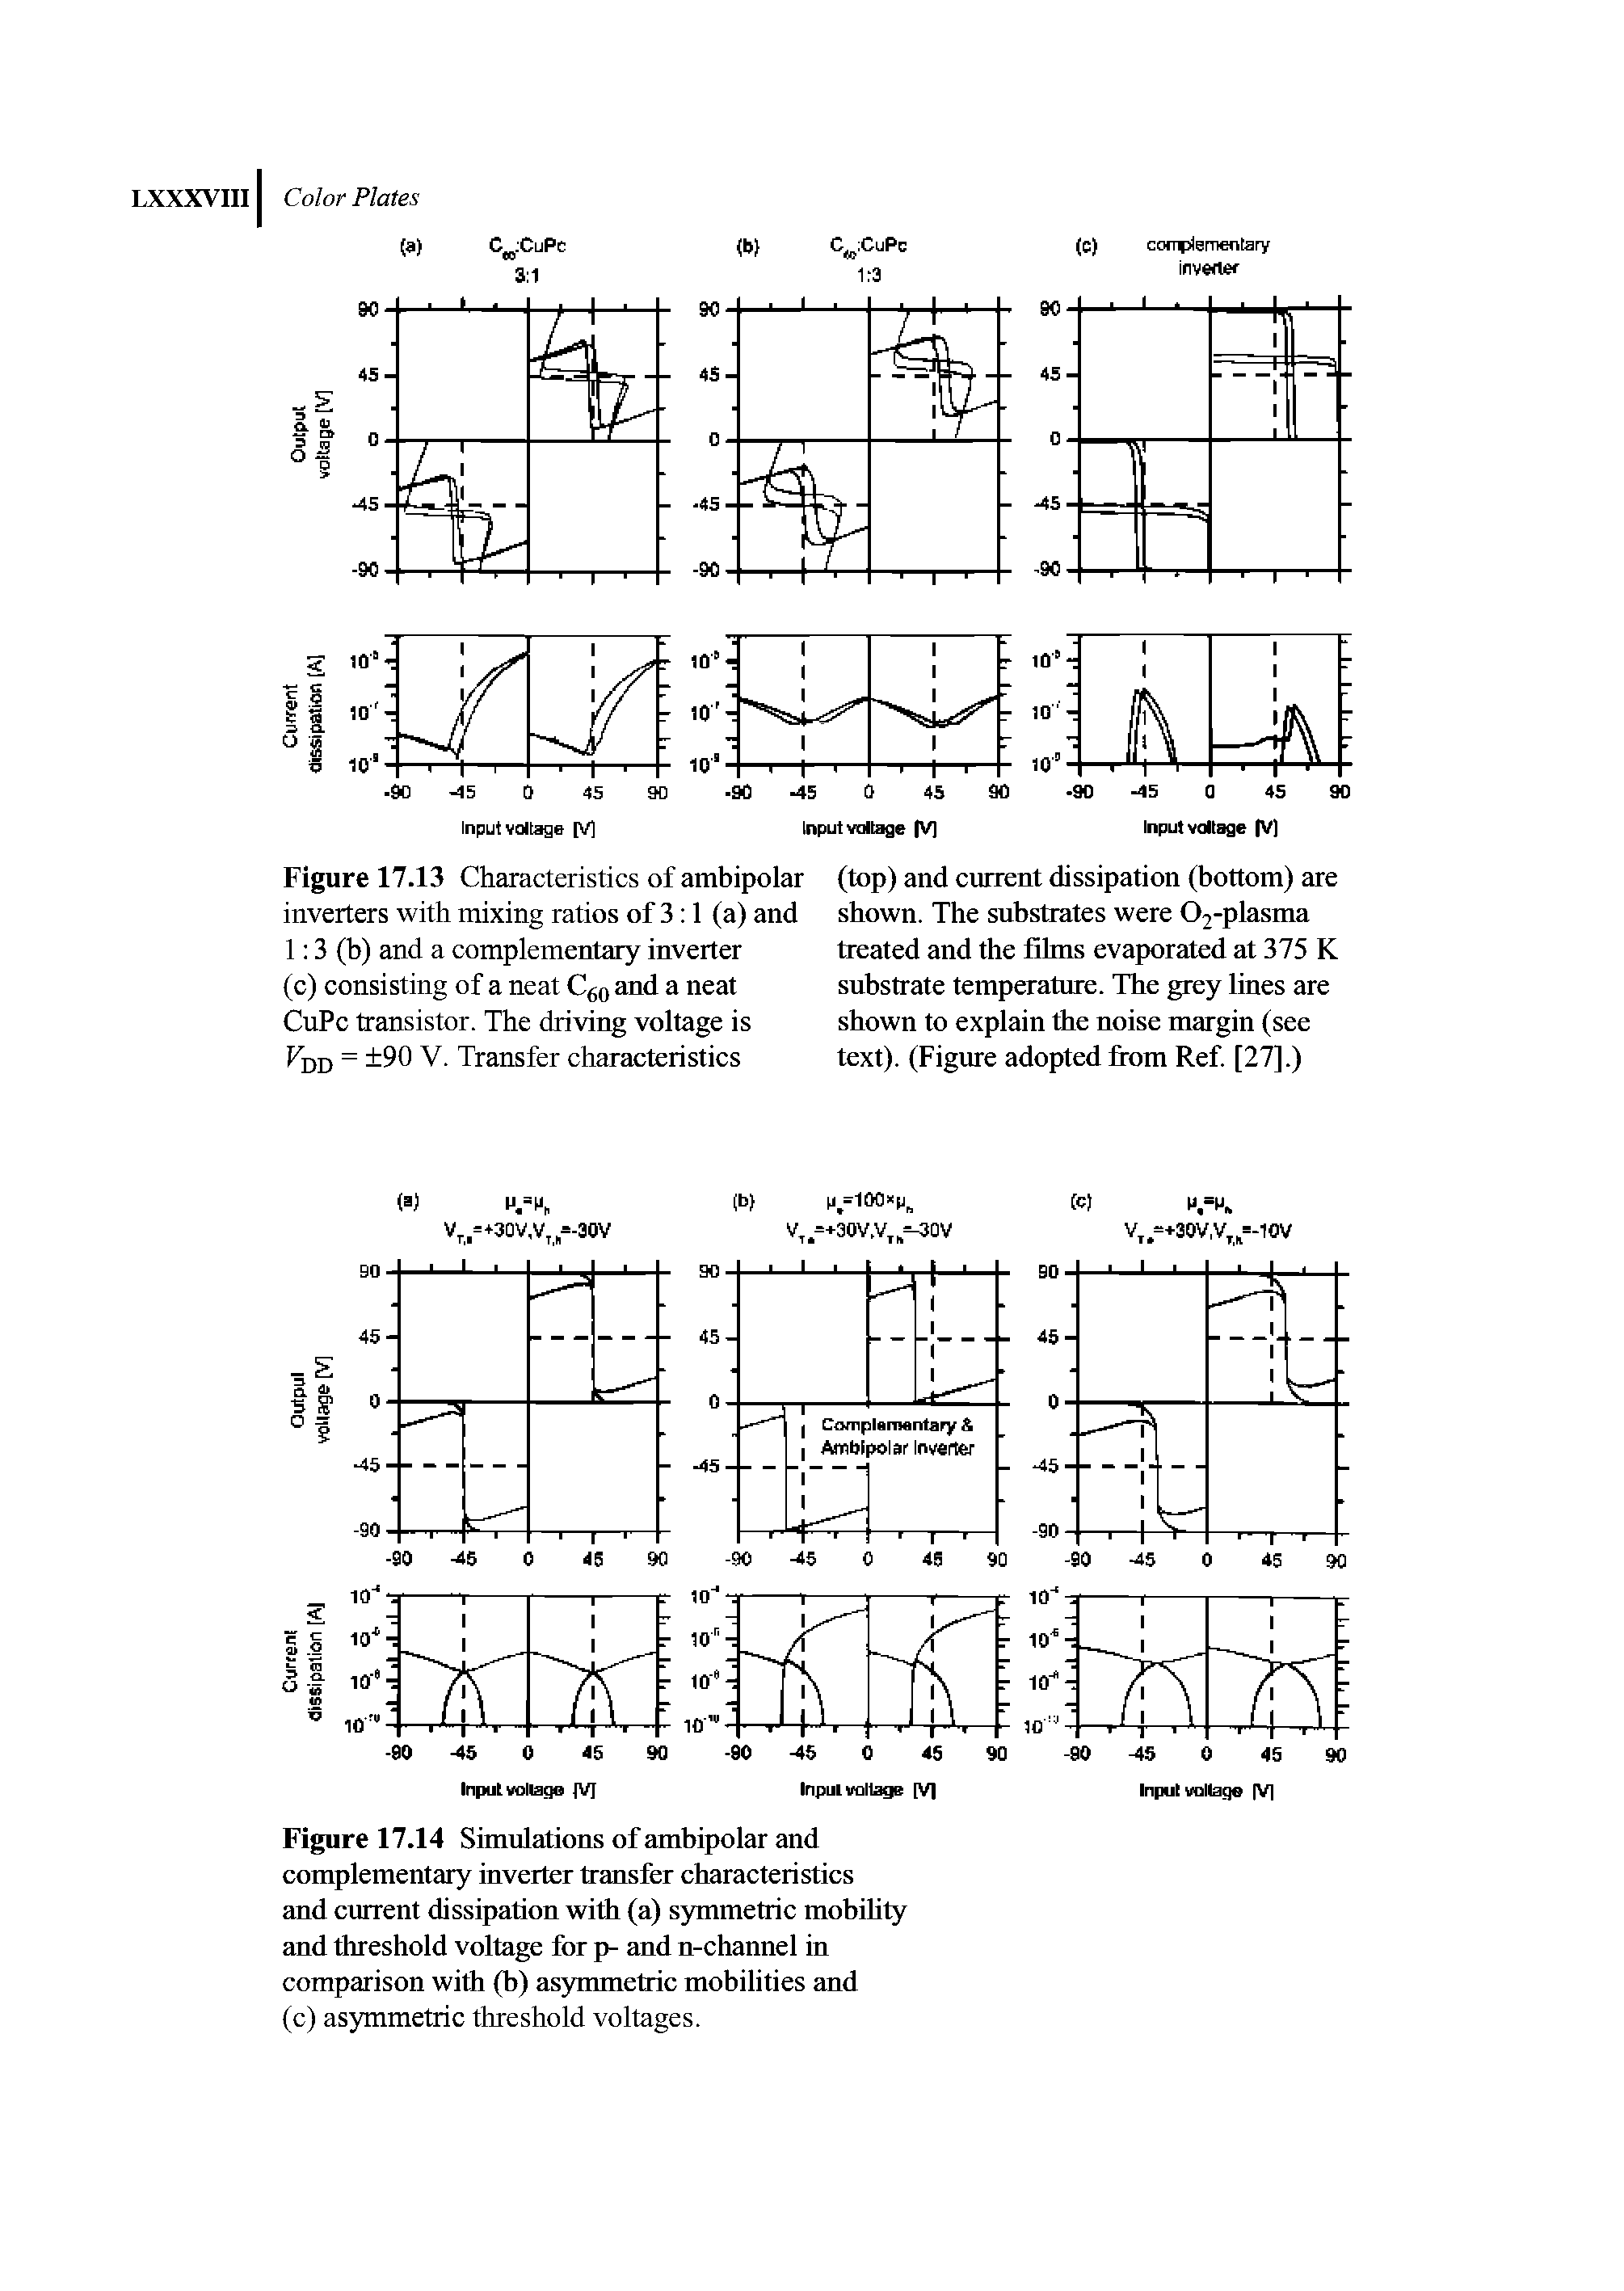 Figure 17.14 Simulations of ambipolar and complementary inverter transfer characteristics and current dissipation with (a) symmetric mobility and threshold voltage for p- and n-channel in comparison with (b) asymmetric mobilities and (c) asymmetric threshold voltages.